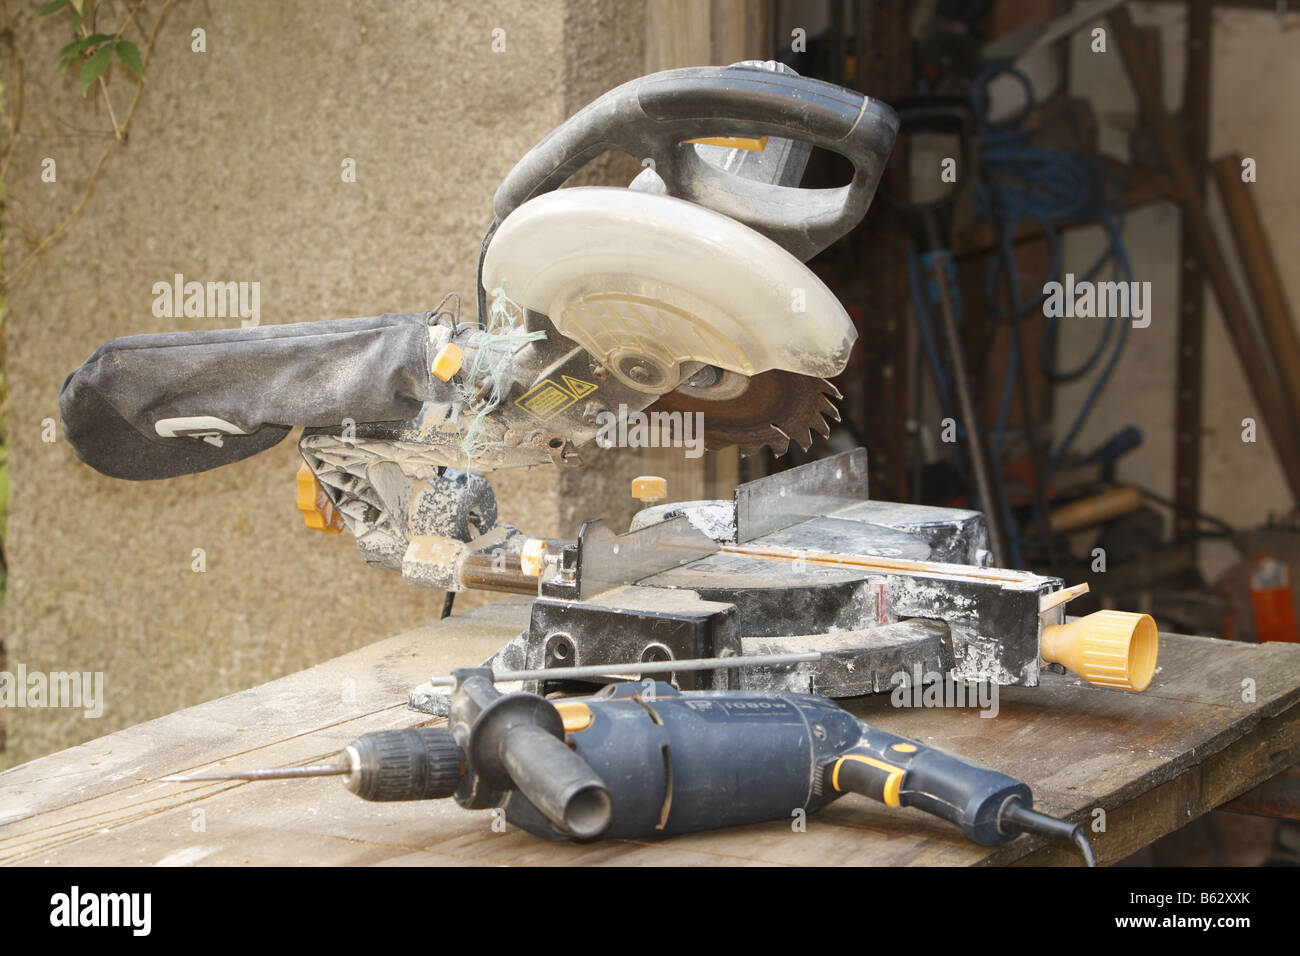 Electric drill and circular saw laying on a workbench Stock Photo